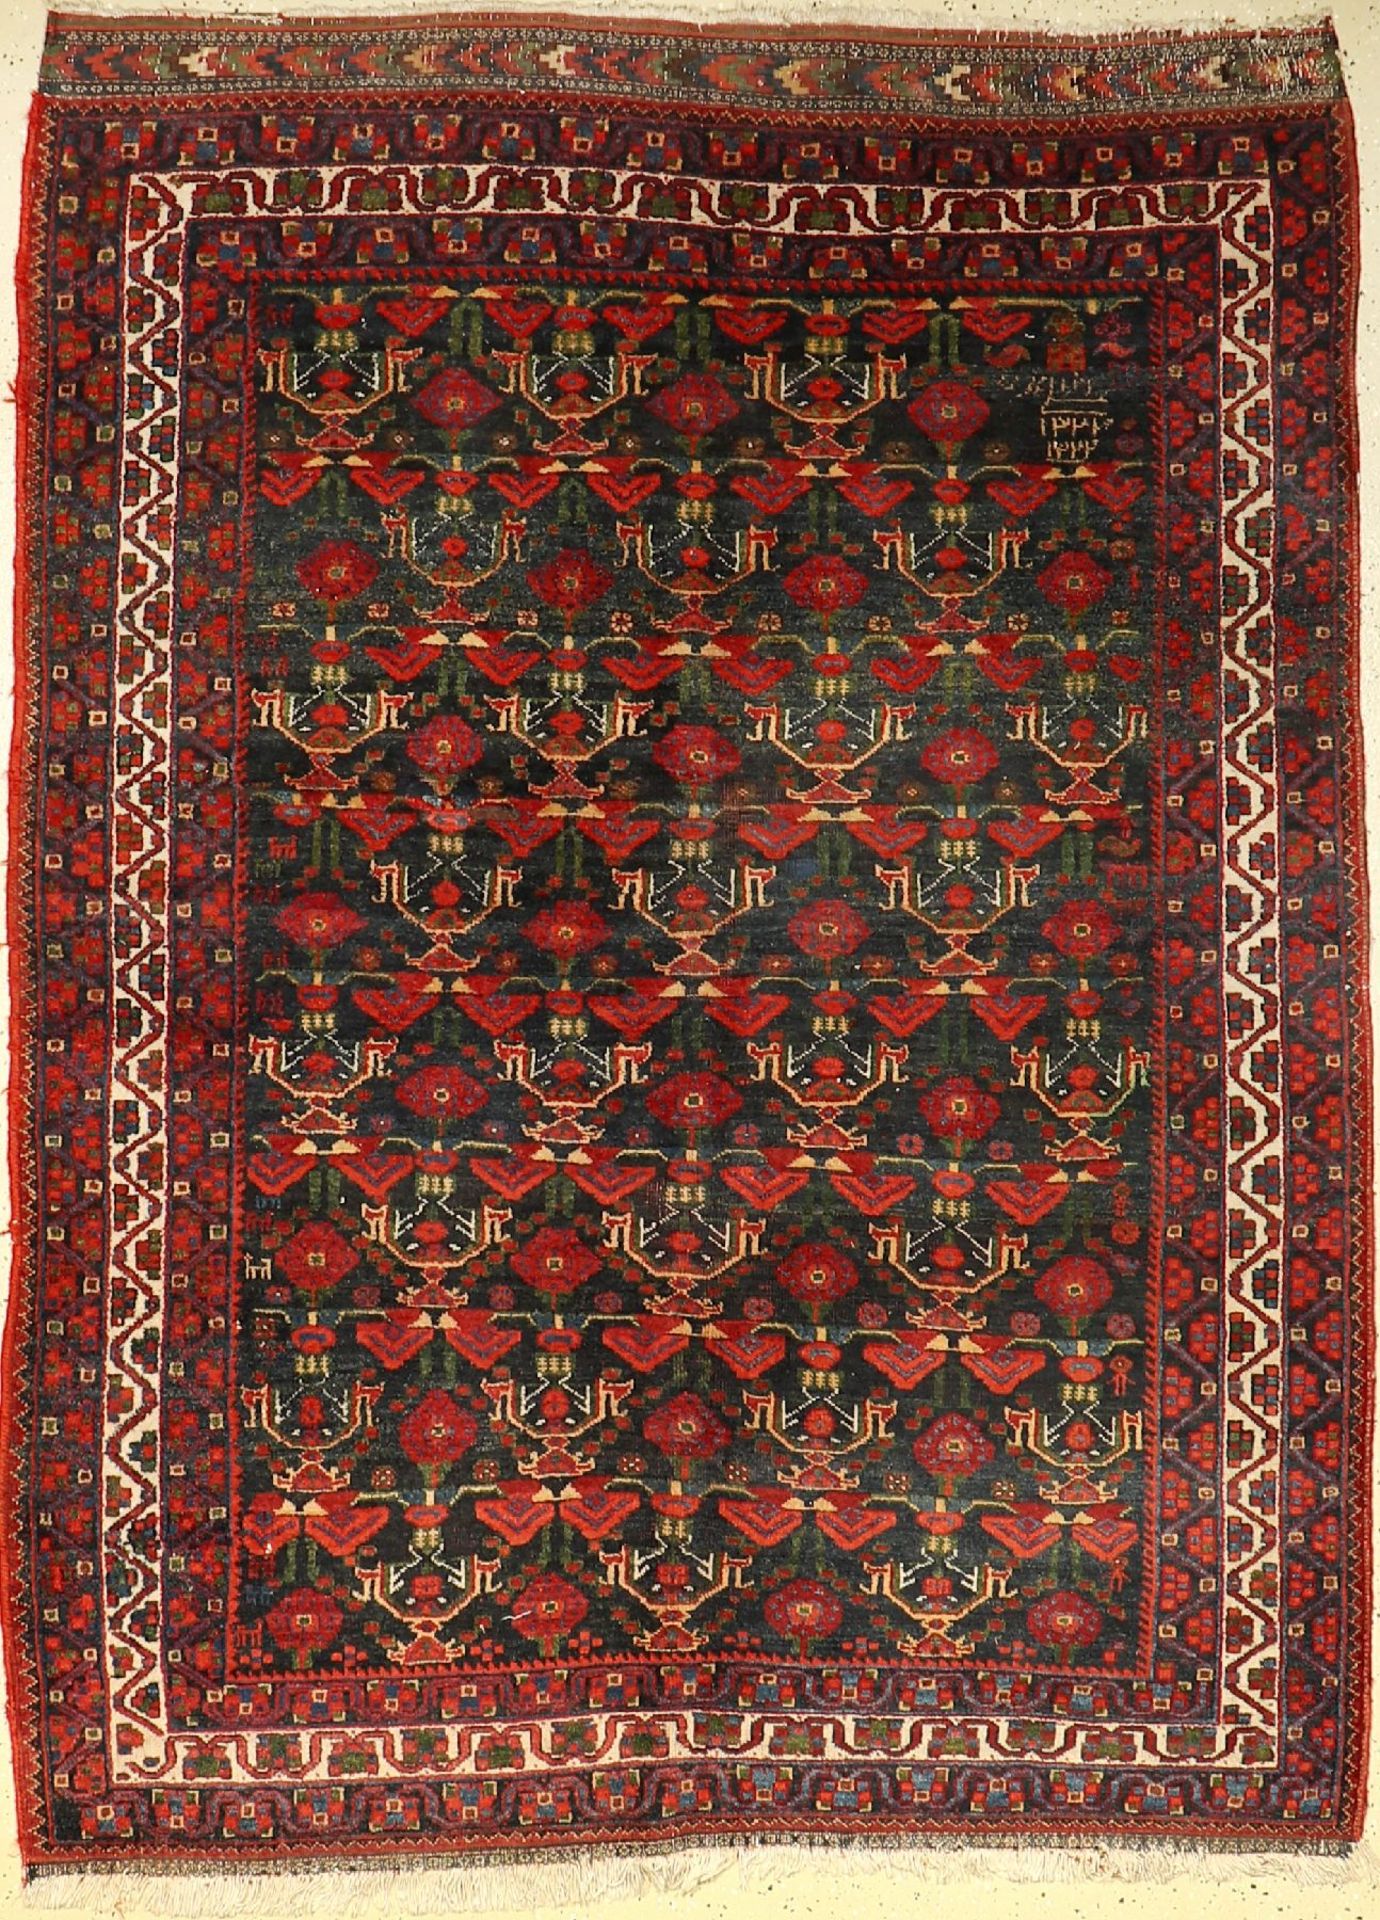 Sirjan old dated, Persia, around 1930, wool oncotton, approx. 191 x 147 cm, condition: 3. Auction: